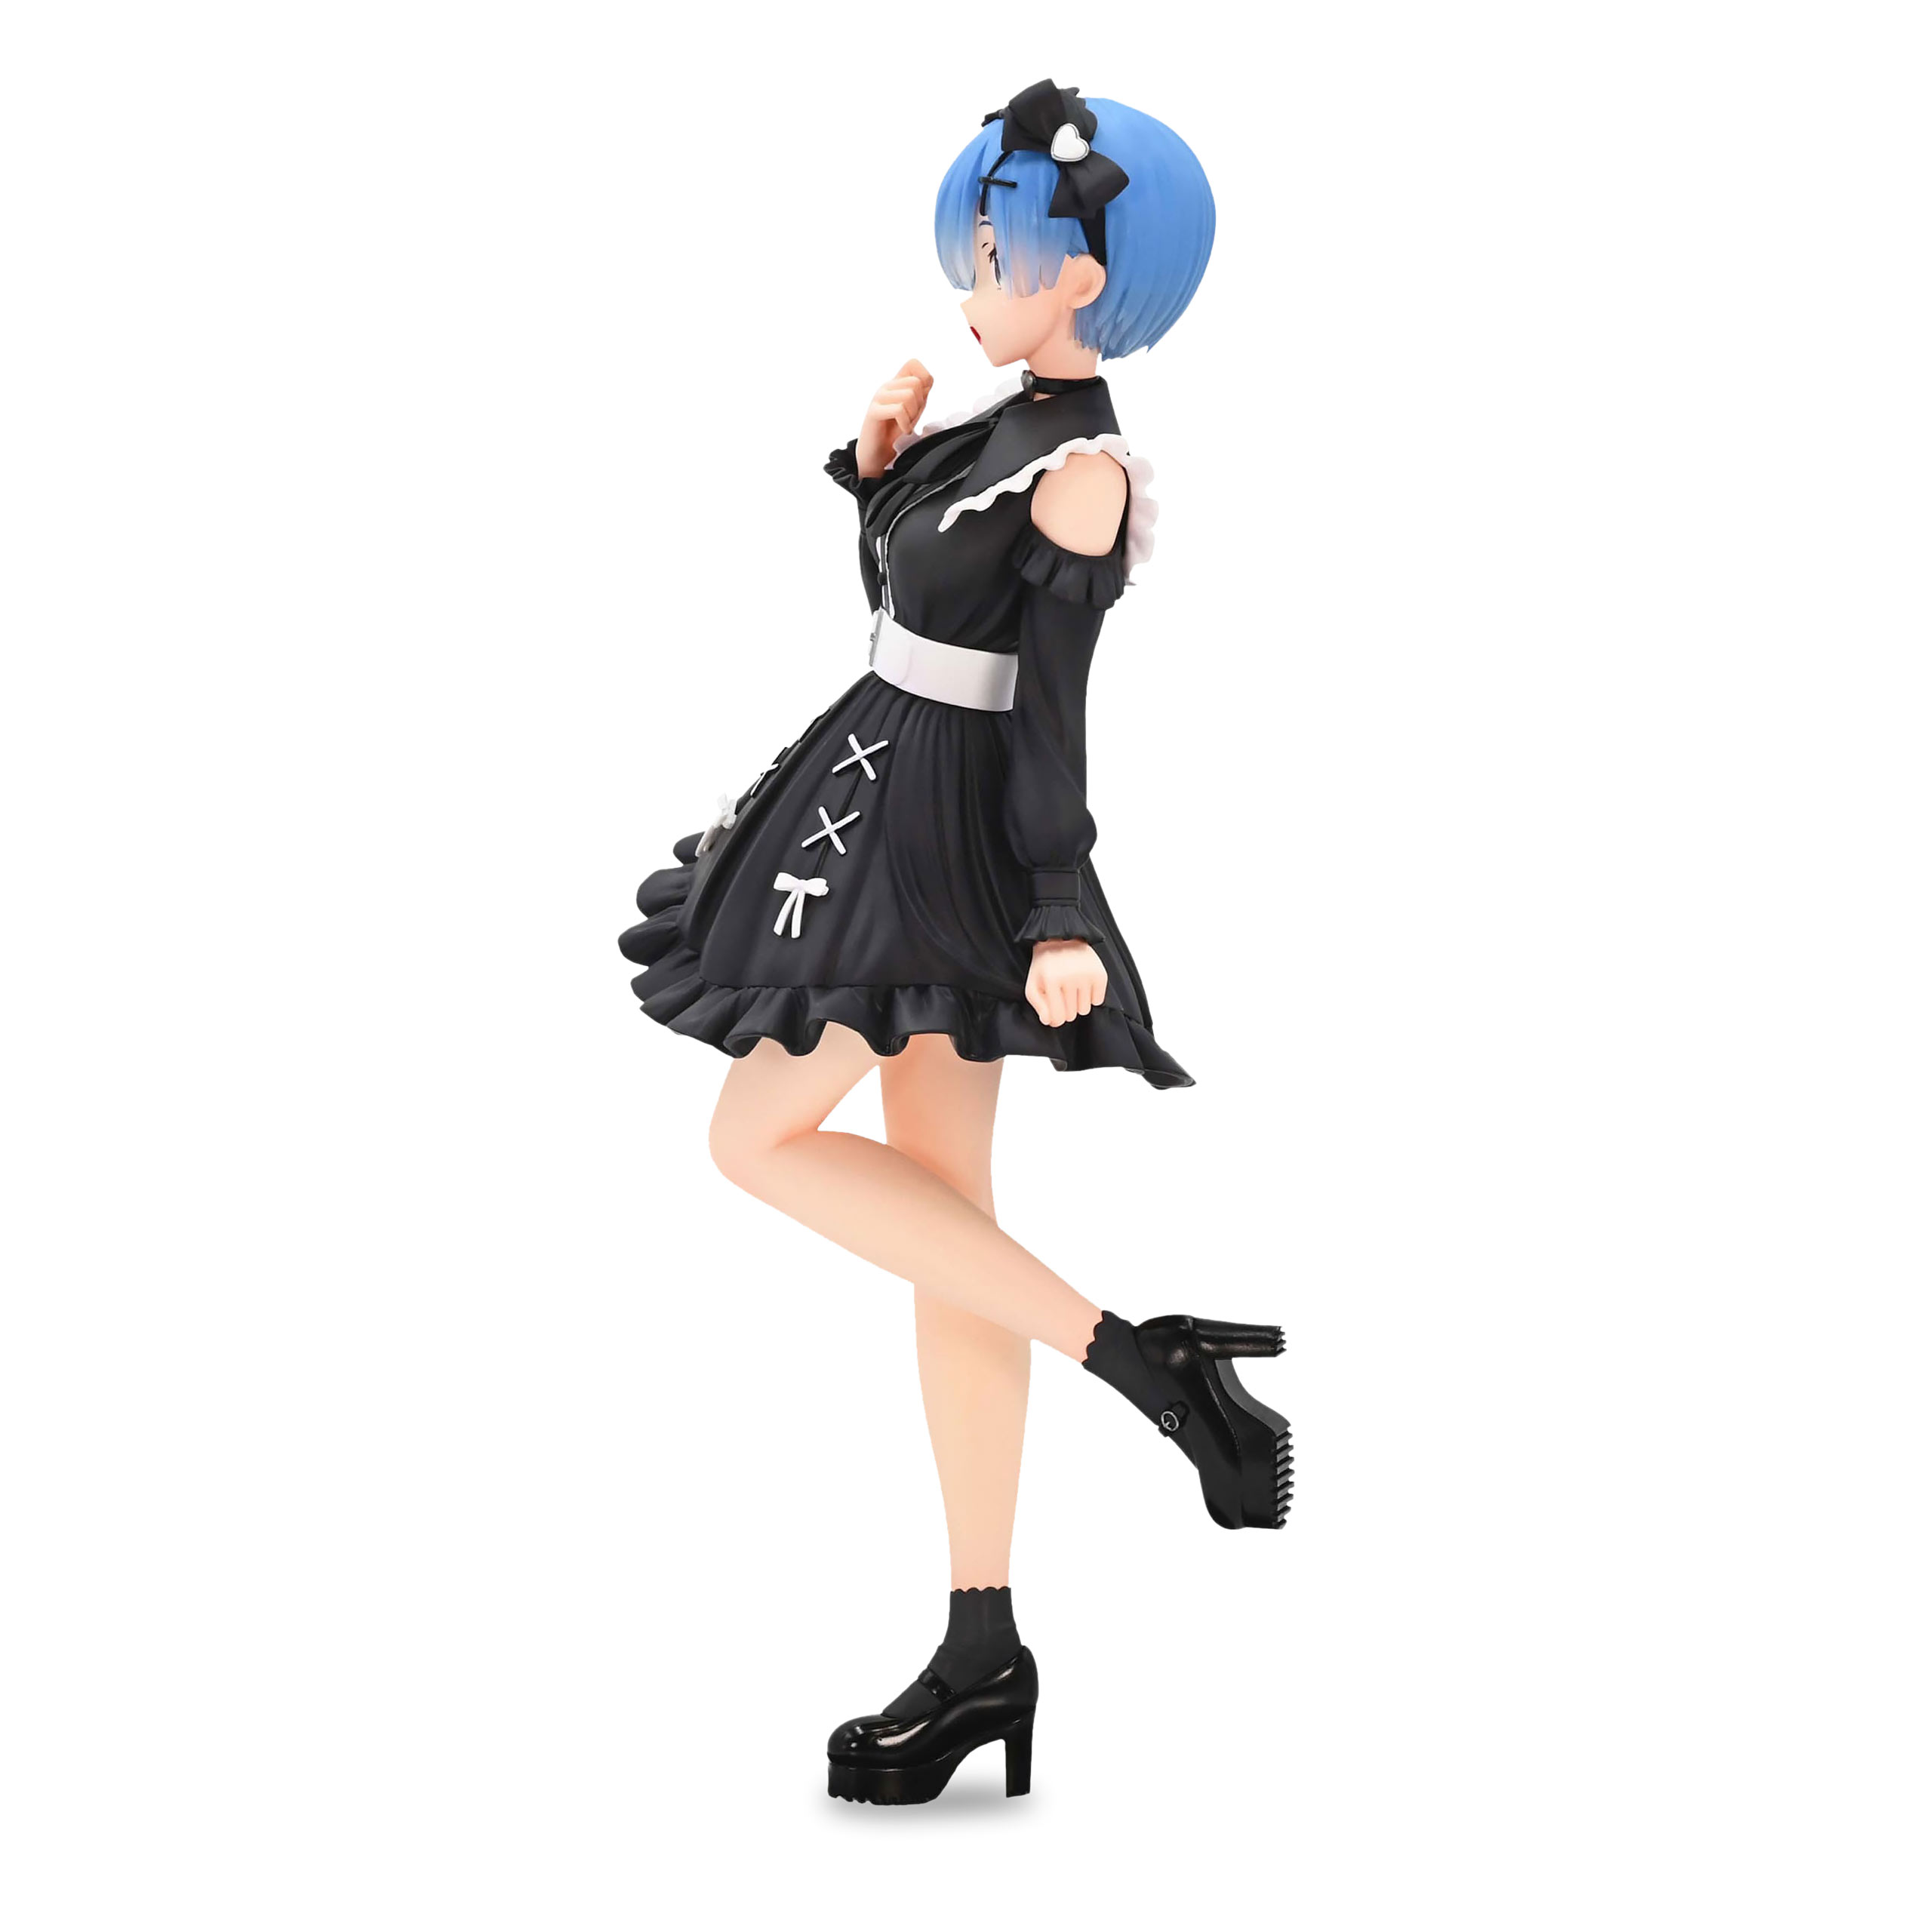 Re:Zero - Figurine Rem Girly Outfit Noir